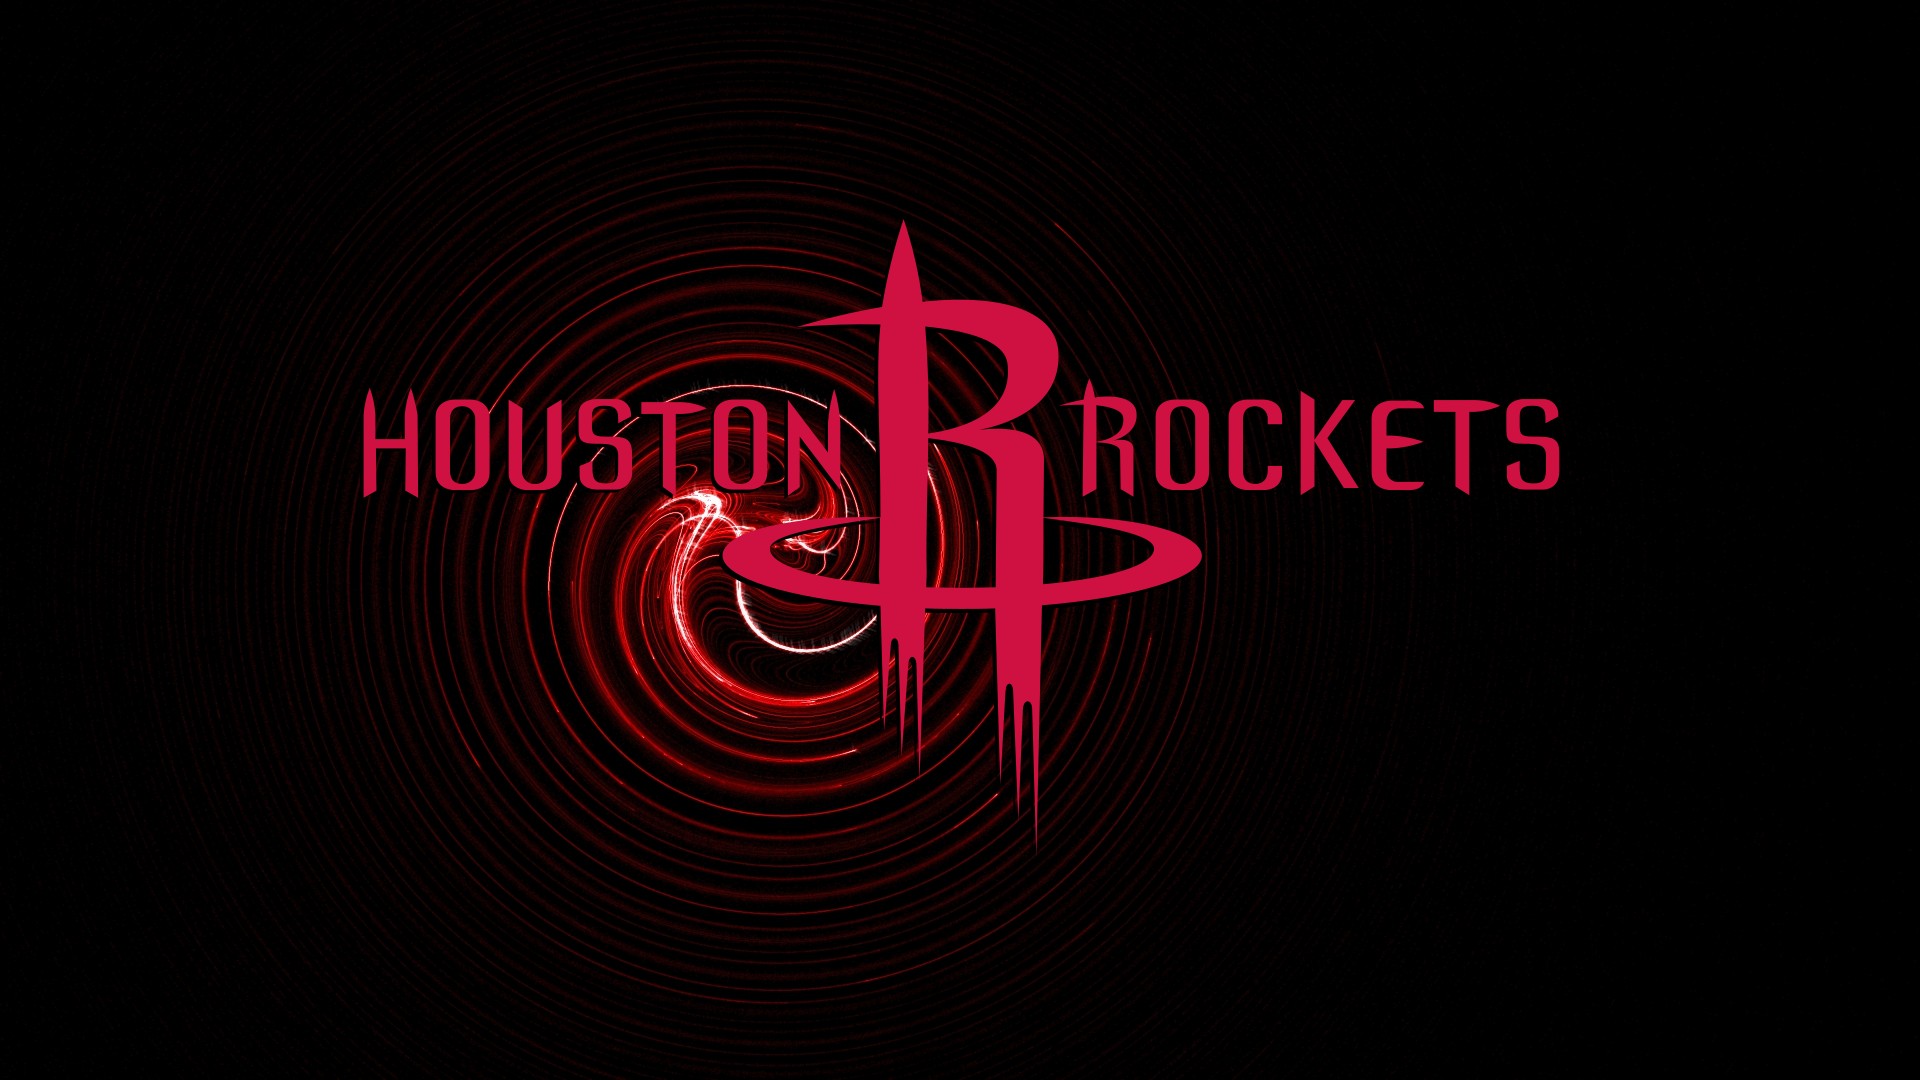 Wallpapers Rockets with image dimensions 1920x1080 pixel. You can make this wallpaper for your Desktop Computer Backgrounds, Windows or Mac Screensavers, iPhone Lock screen, Tablet or Android and another Mobile Phone device